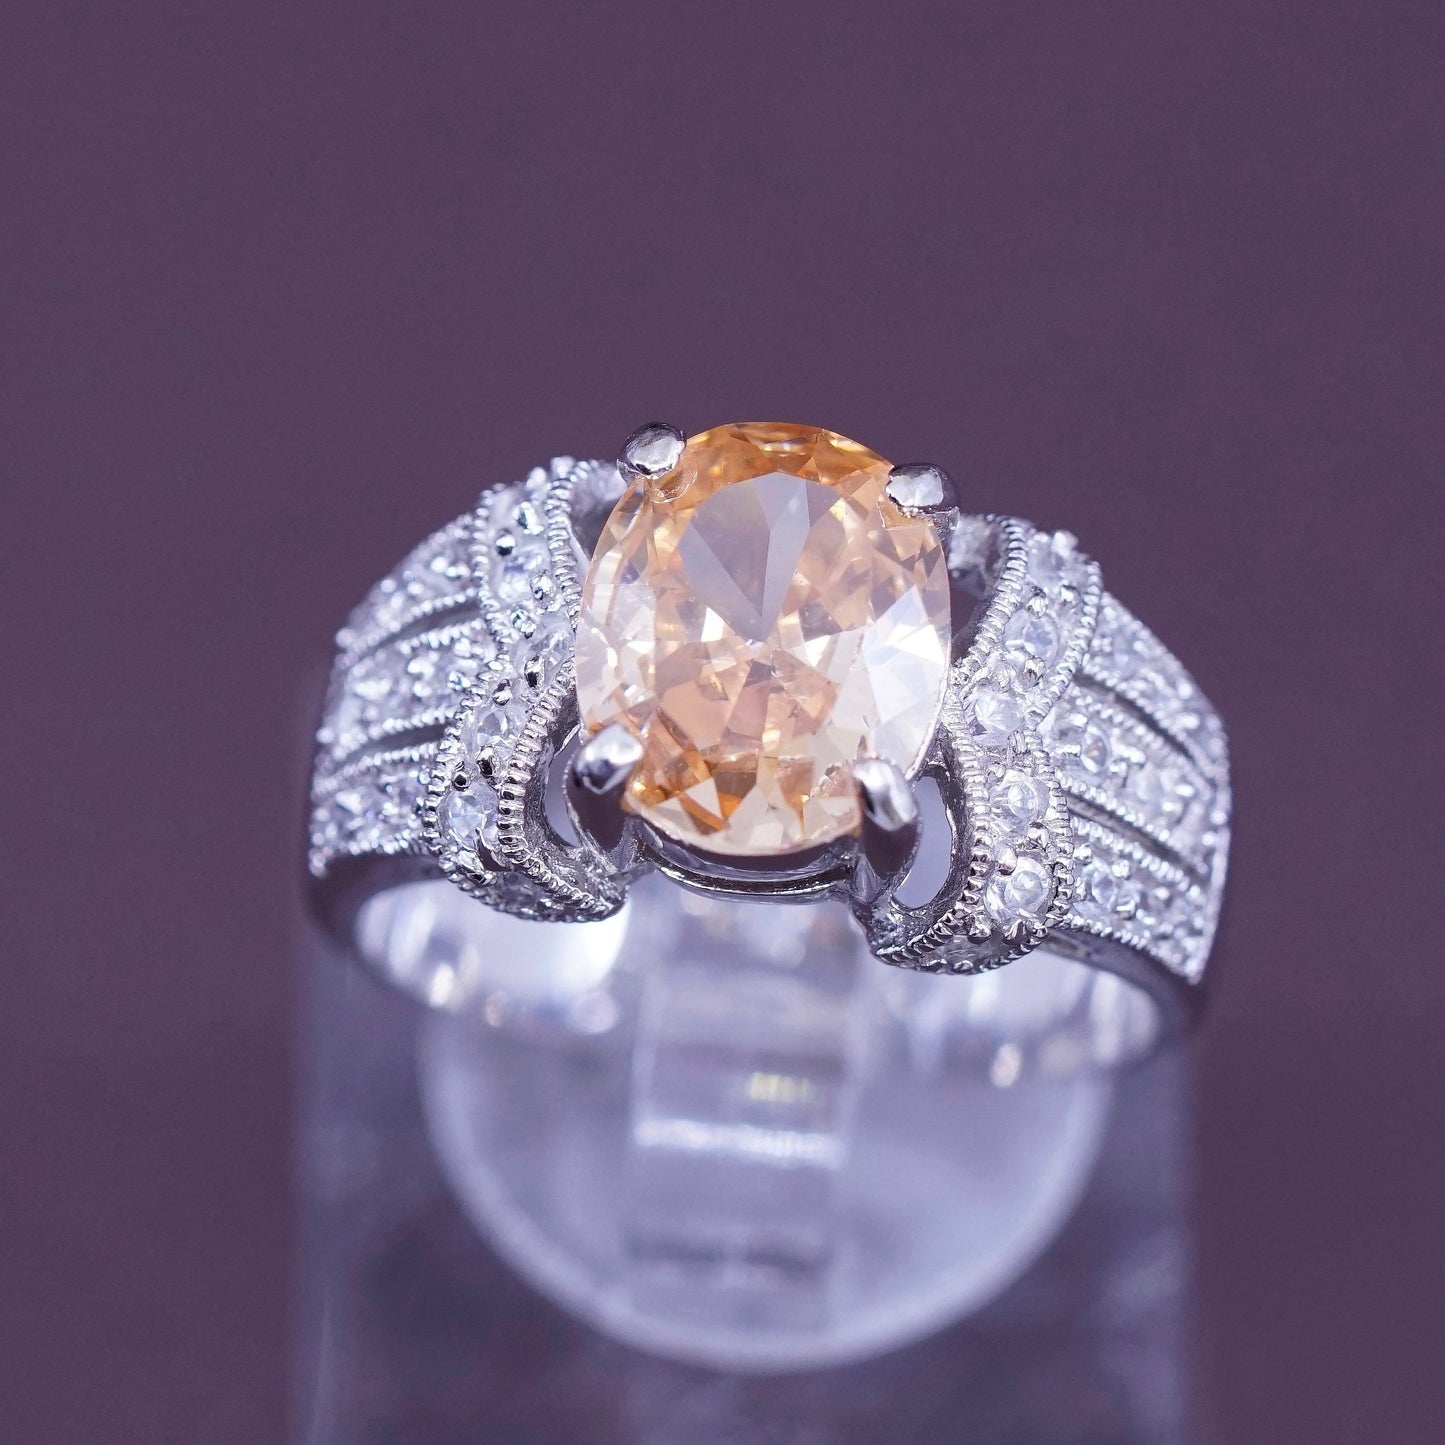 Size 7.5, vintage Sterling 925 silver handmade ring with orange citrine and cz